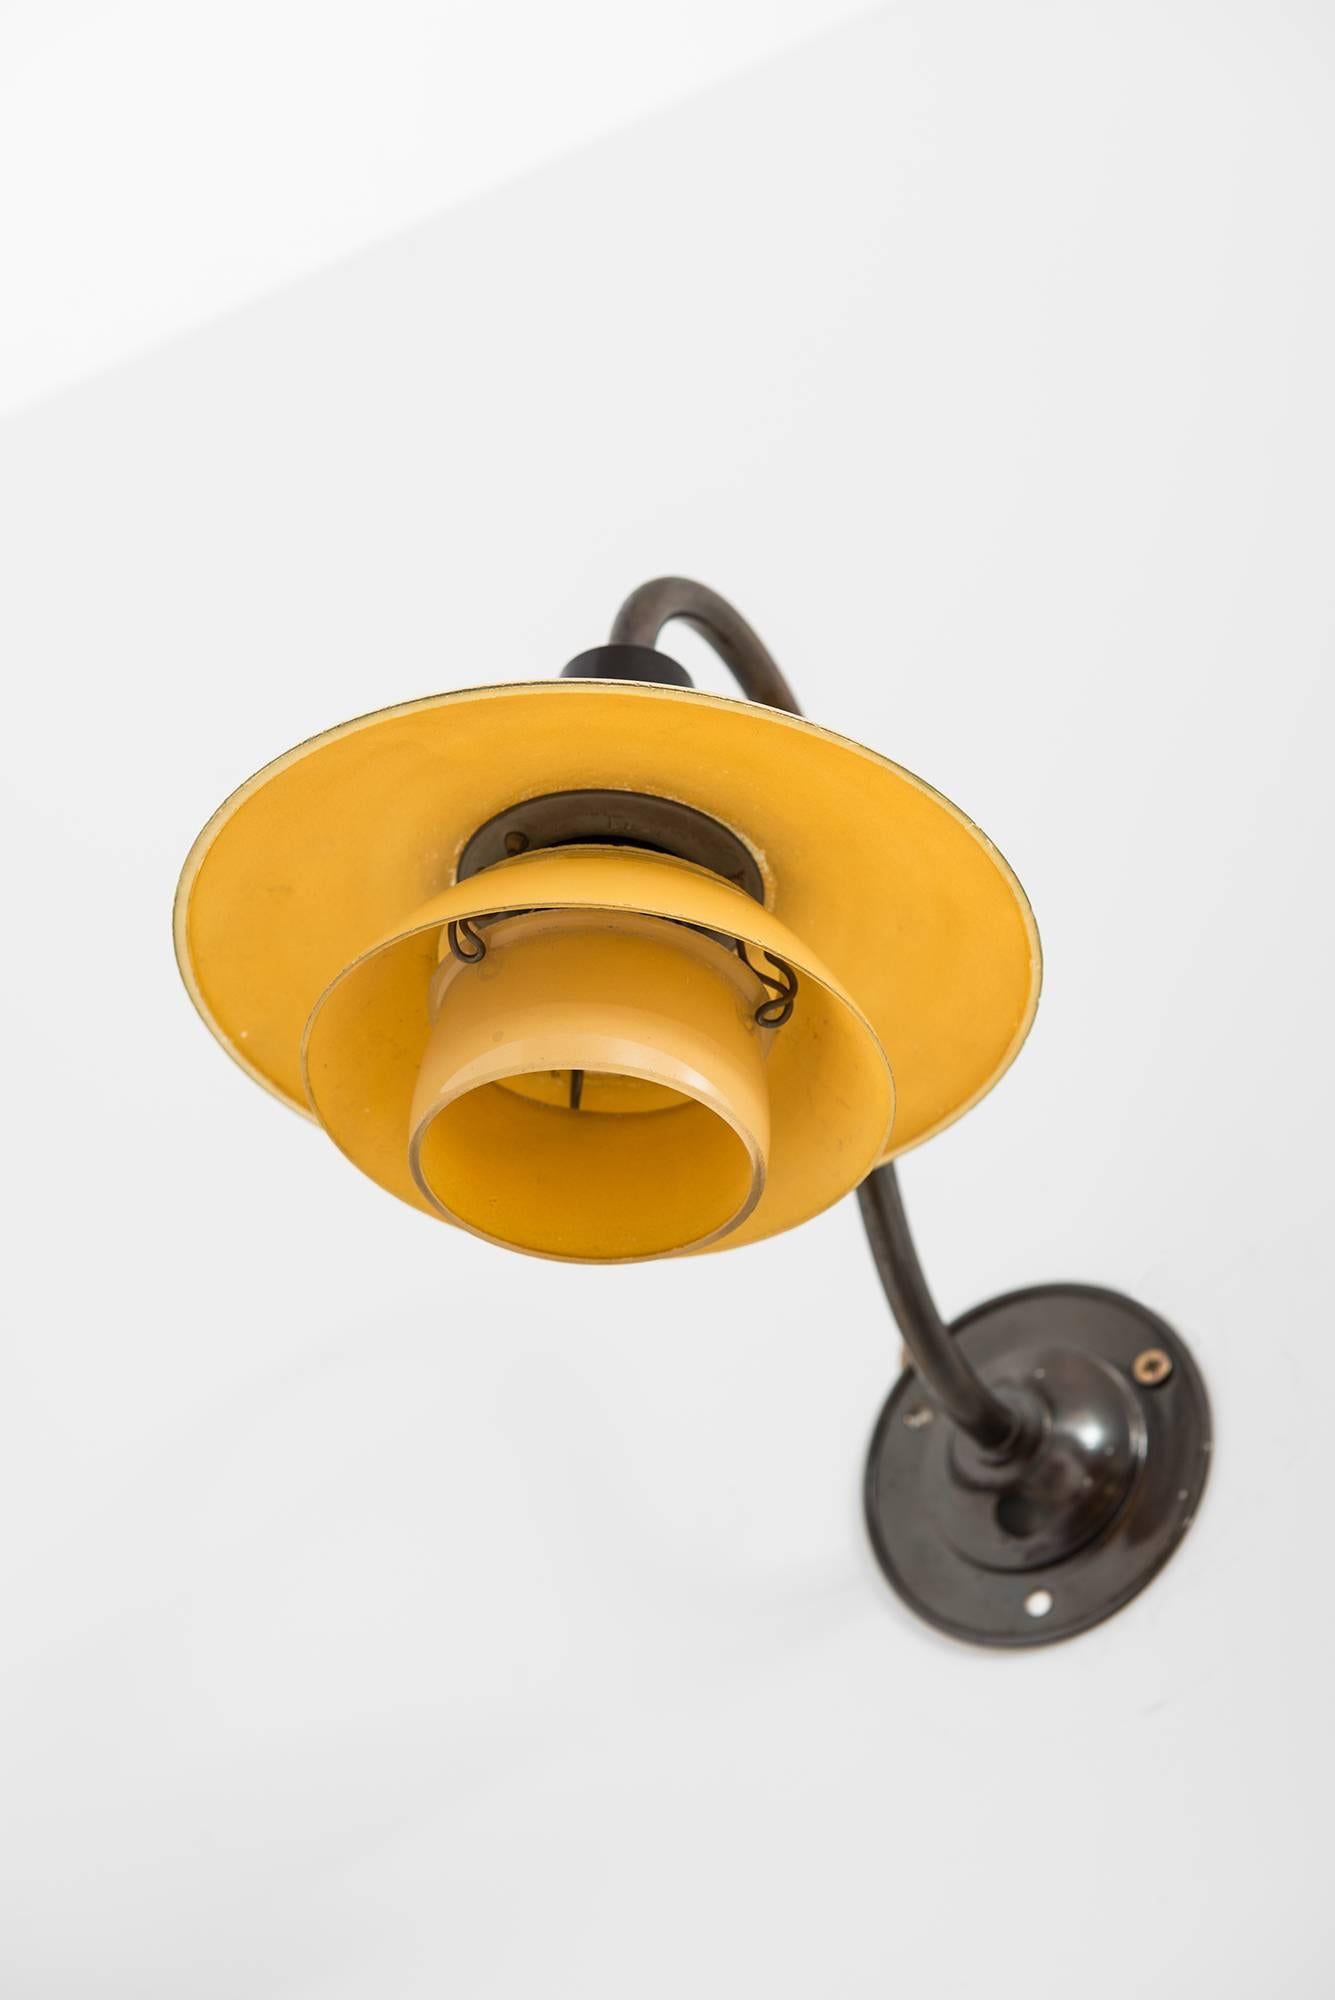 Poul Henningsen Wall Lamp Model PH-1 by Louis Poulsen in Denmark In Excellent Condition For Sale In Limhamn, Skåne län